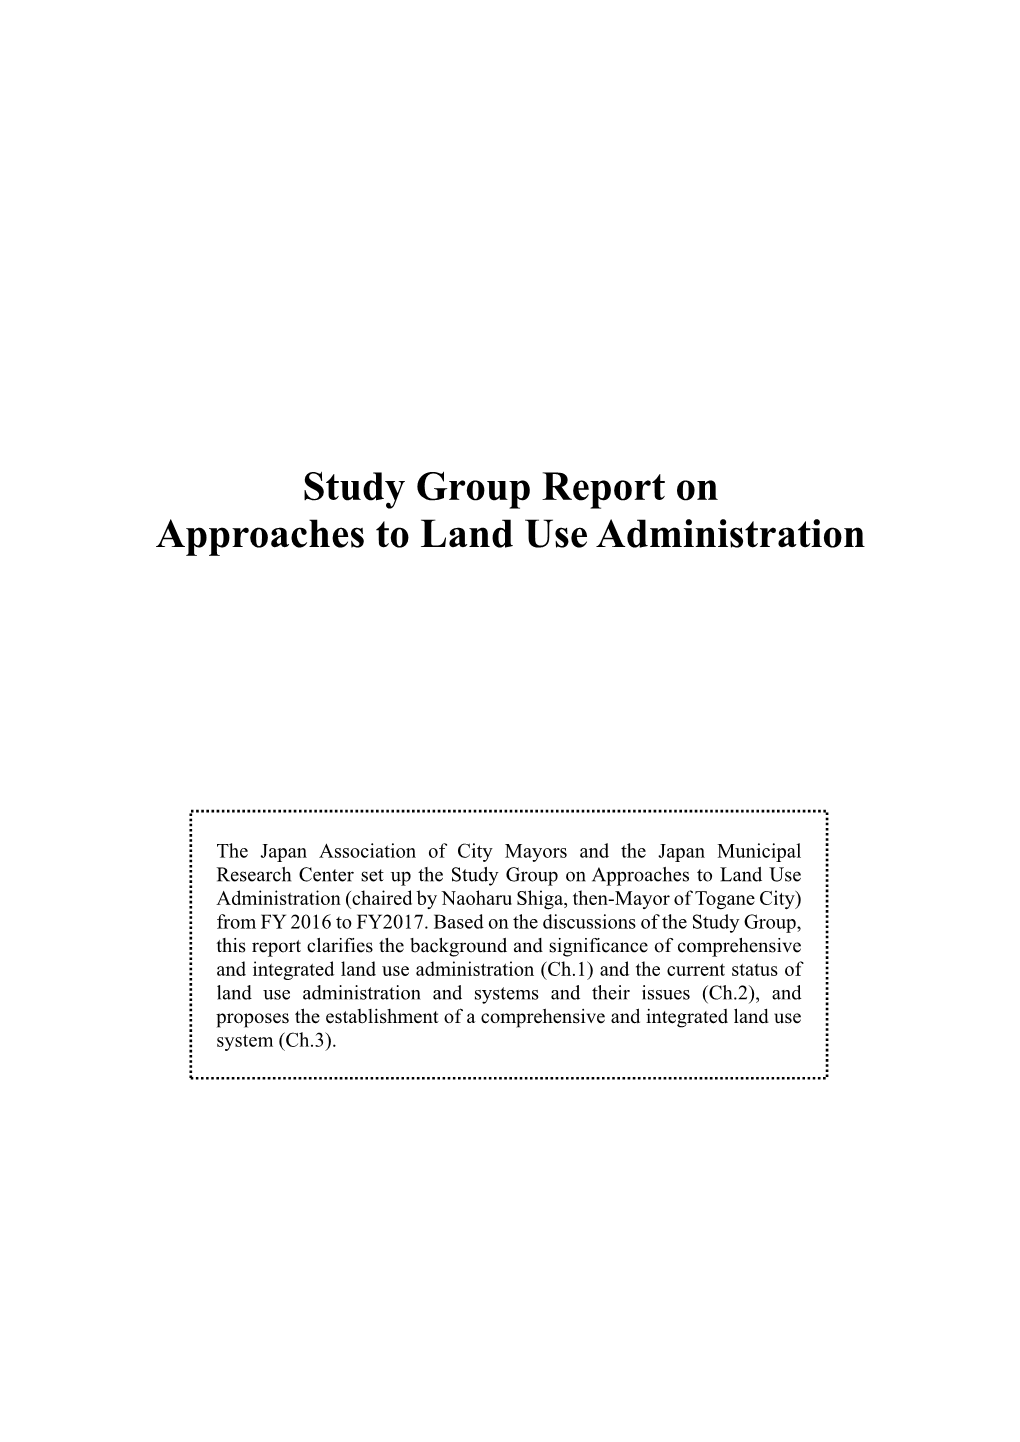 Study Group Report on Approaches to Land Use Administration